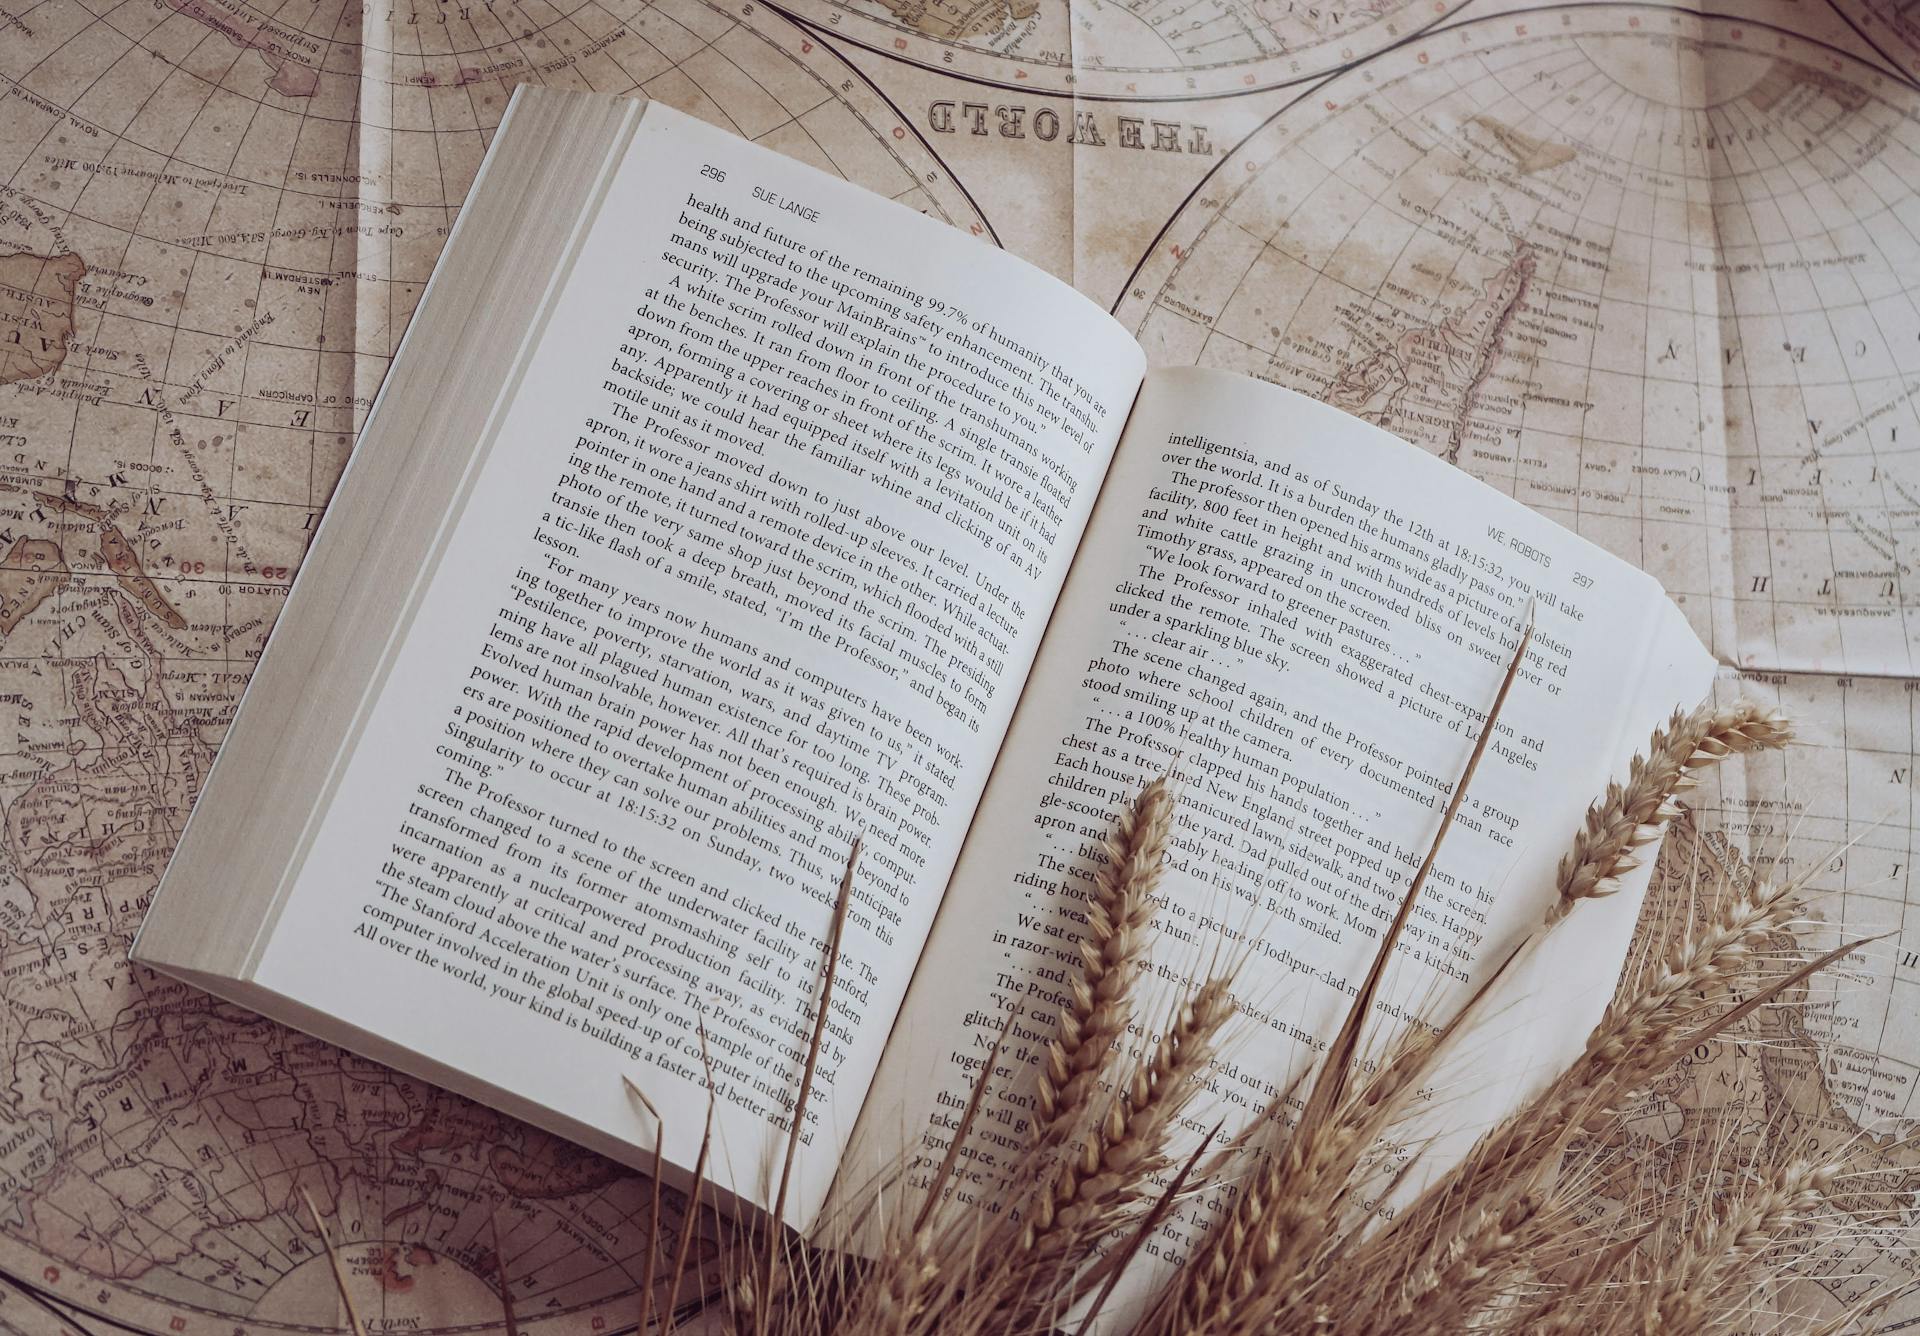 An open book lying on a map | Source: Pexels